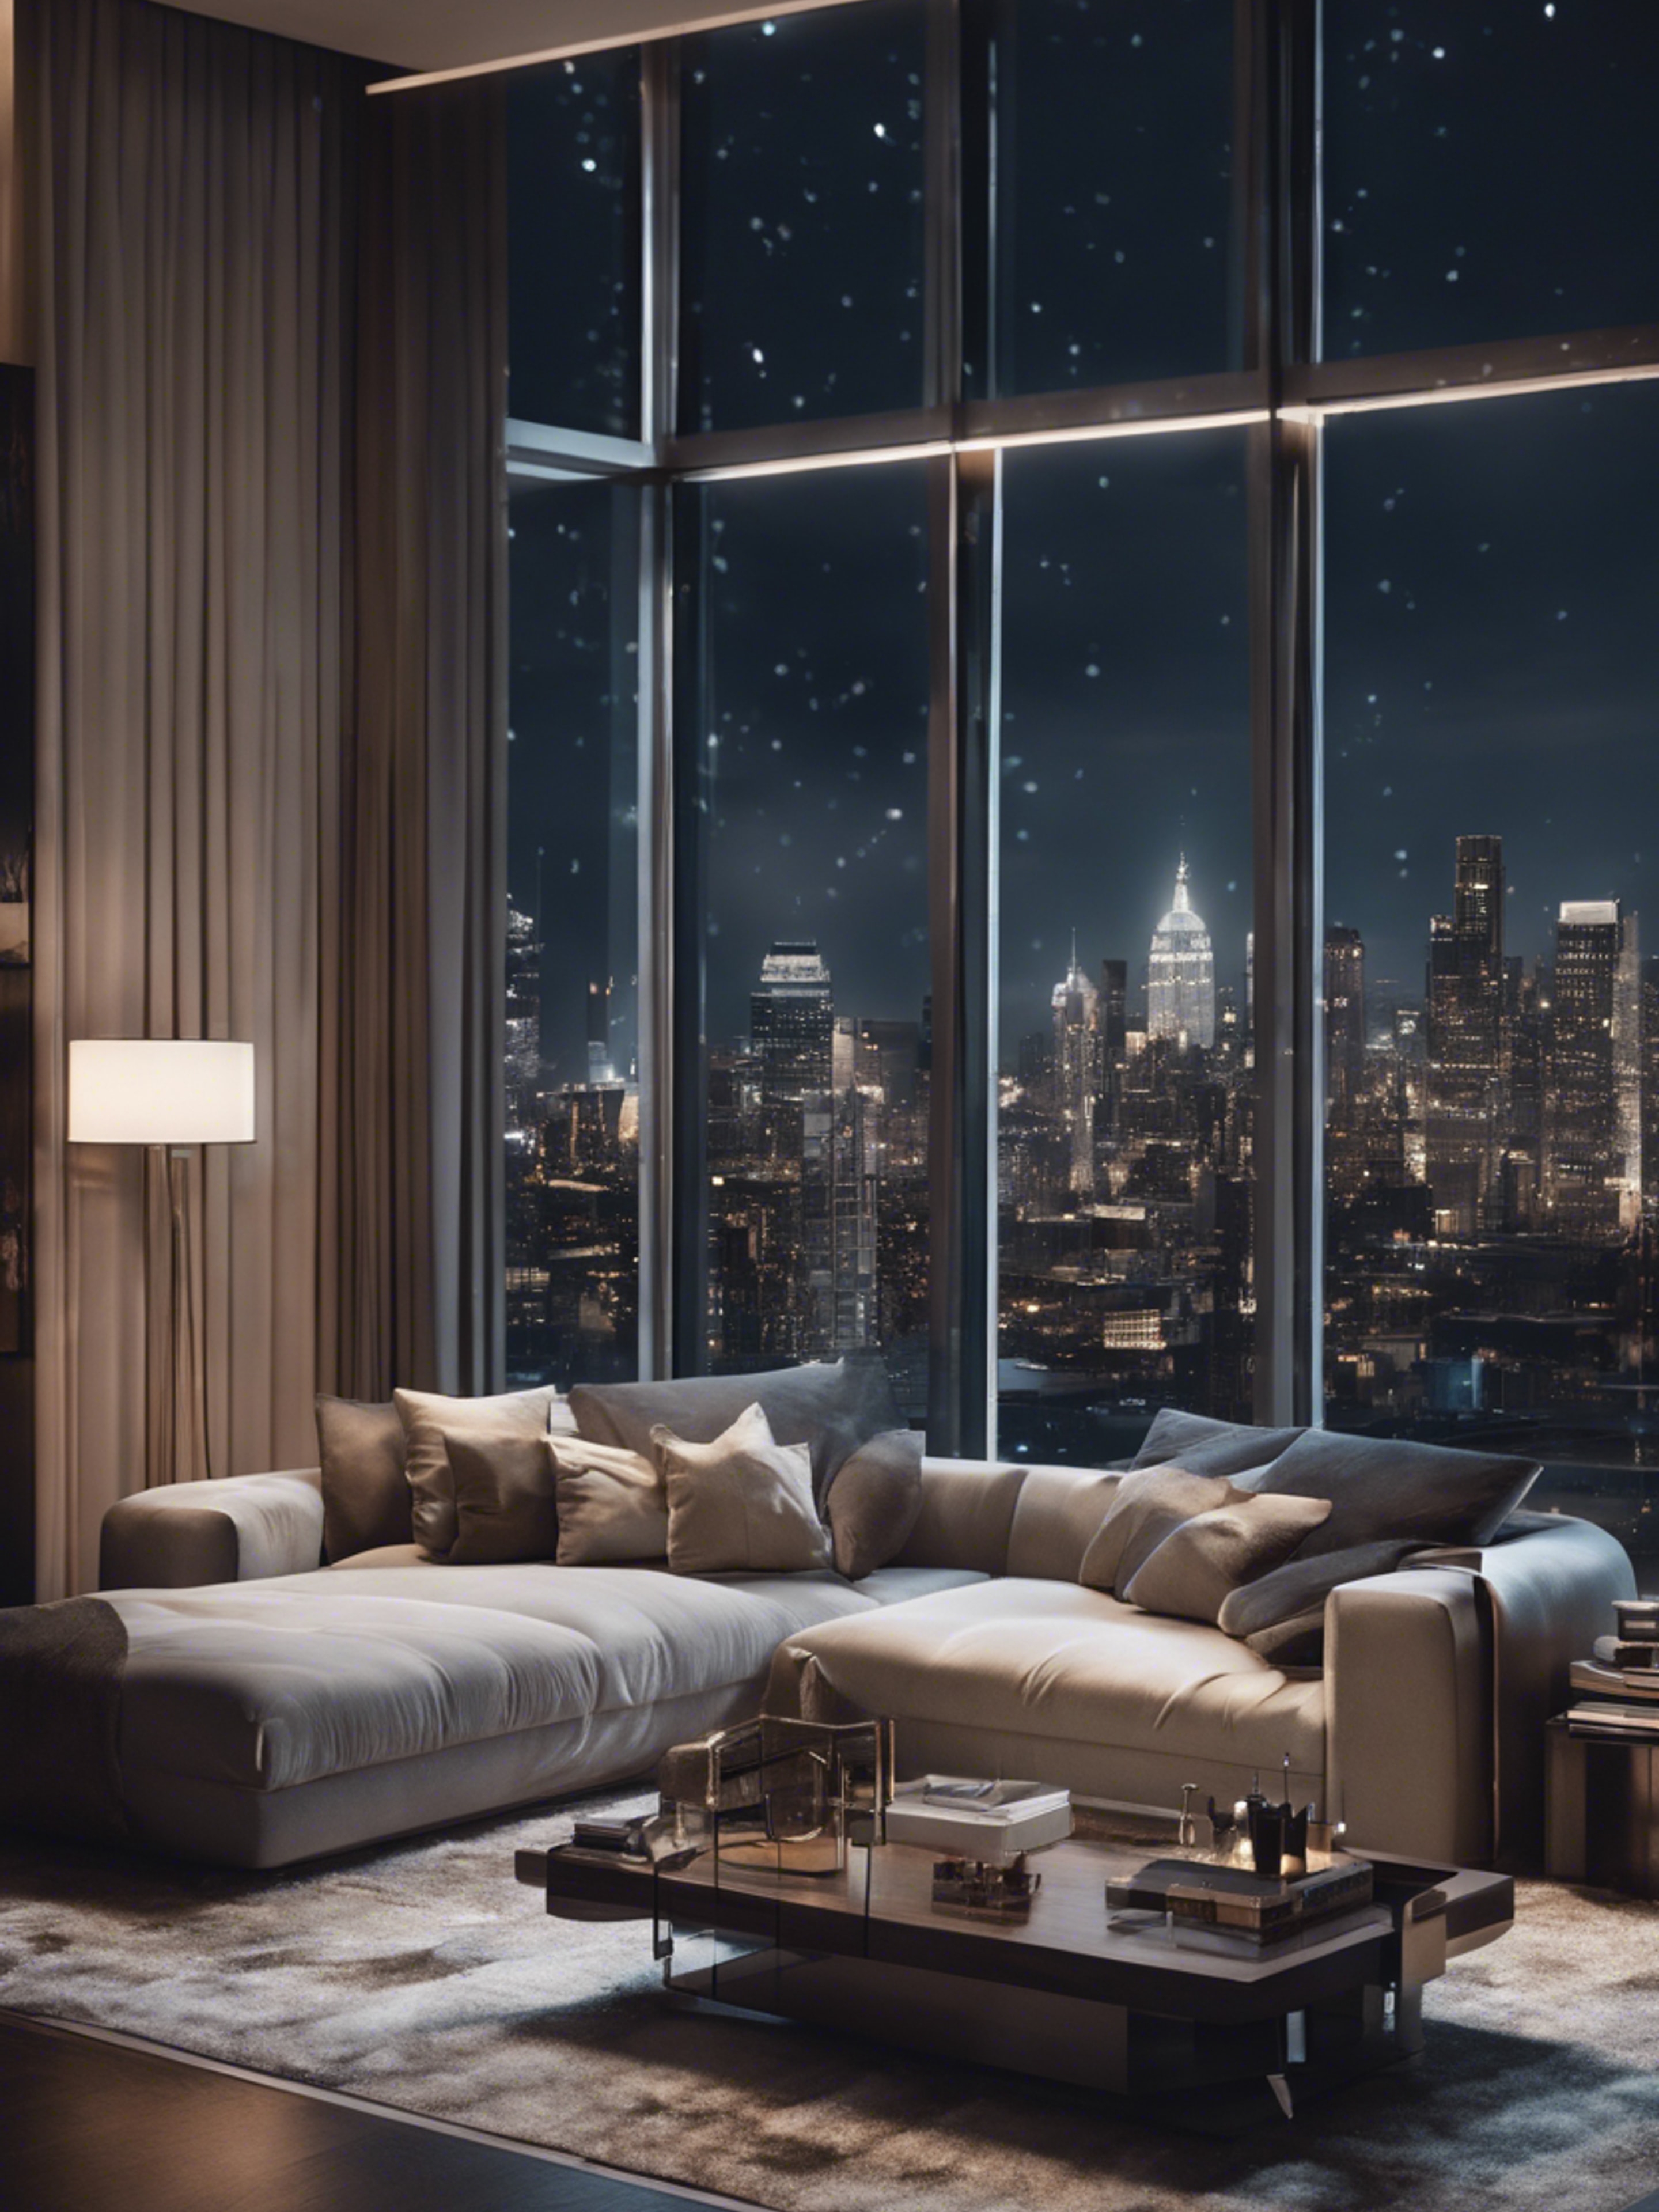 An ultra modern penthouse living room with floor-to-ceiling windows overlooking a night cityscape, adorned with stylish and minimalist decor. Тапет[32f92be3d45a43a5bc6a]